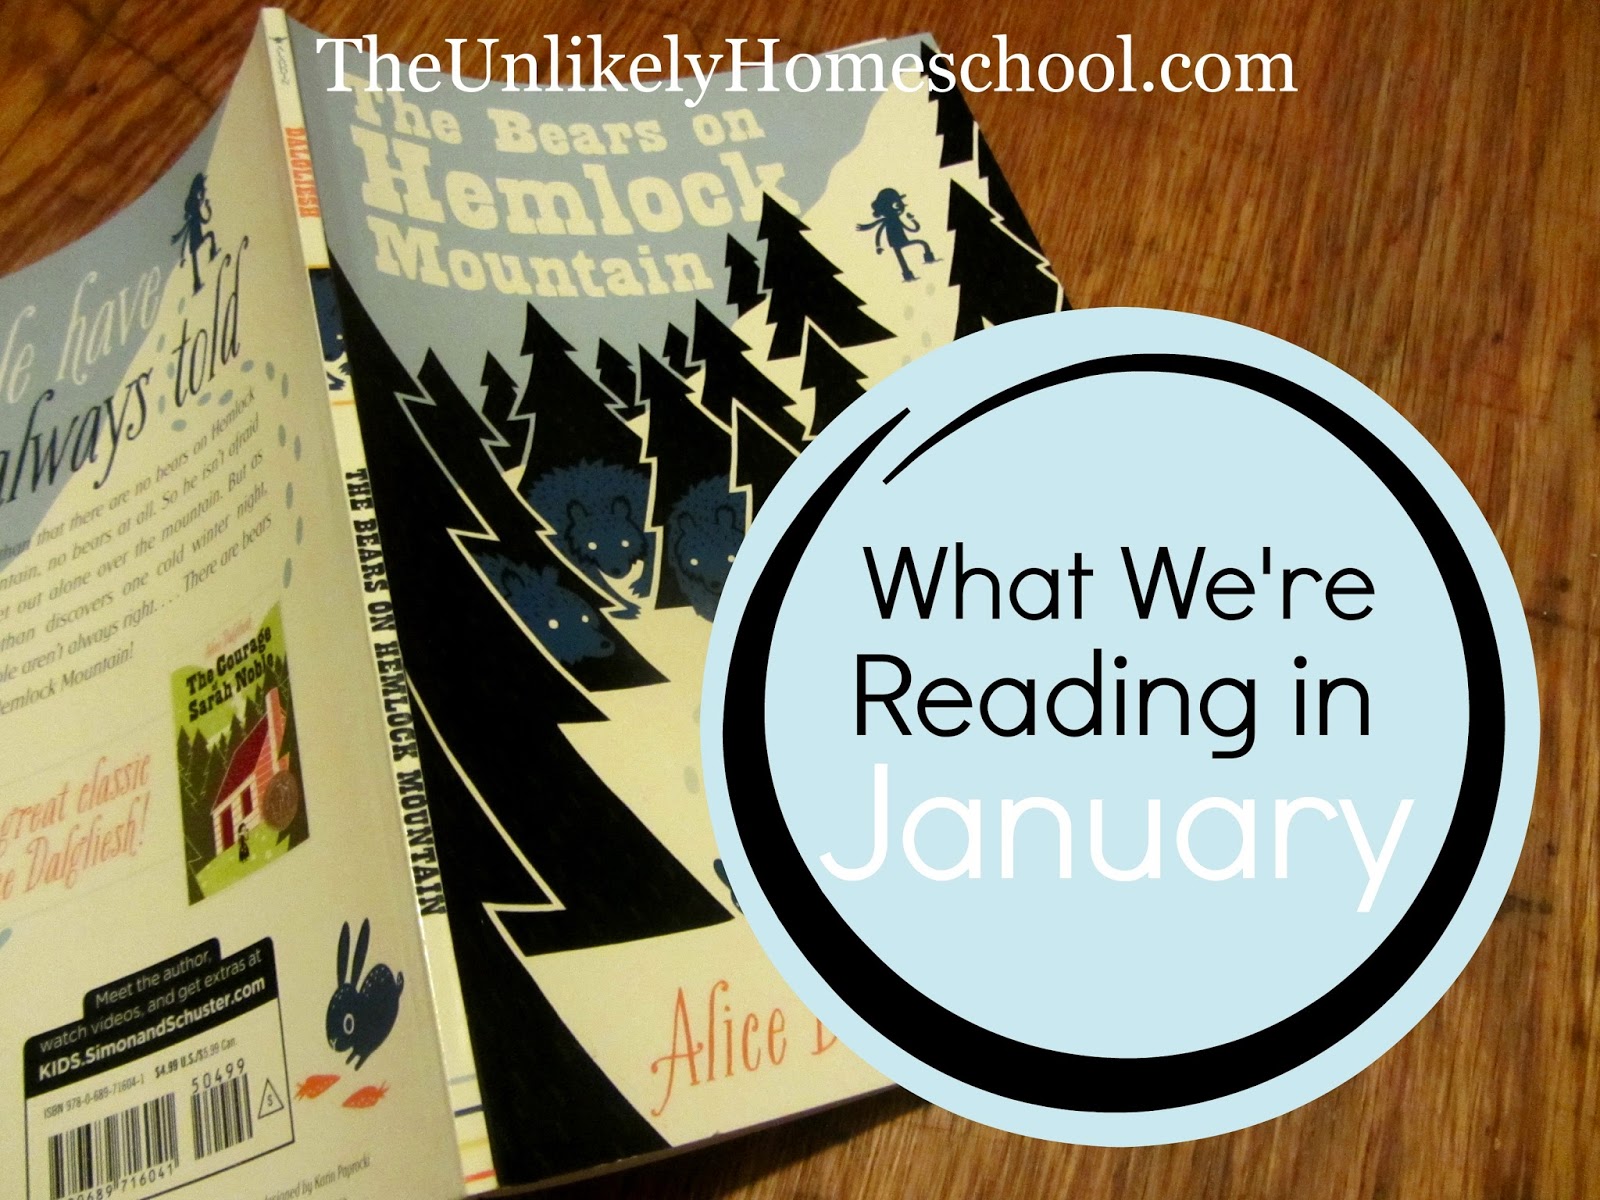 What We're Reading in January {The Unlikely Homeschool}